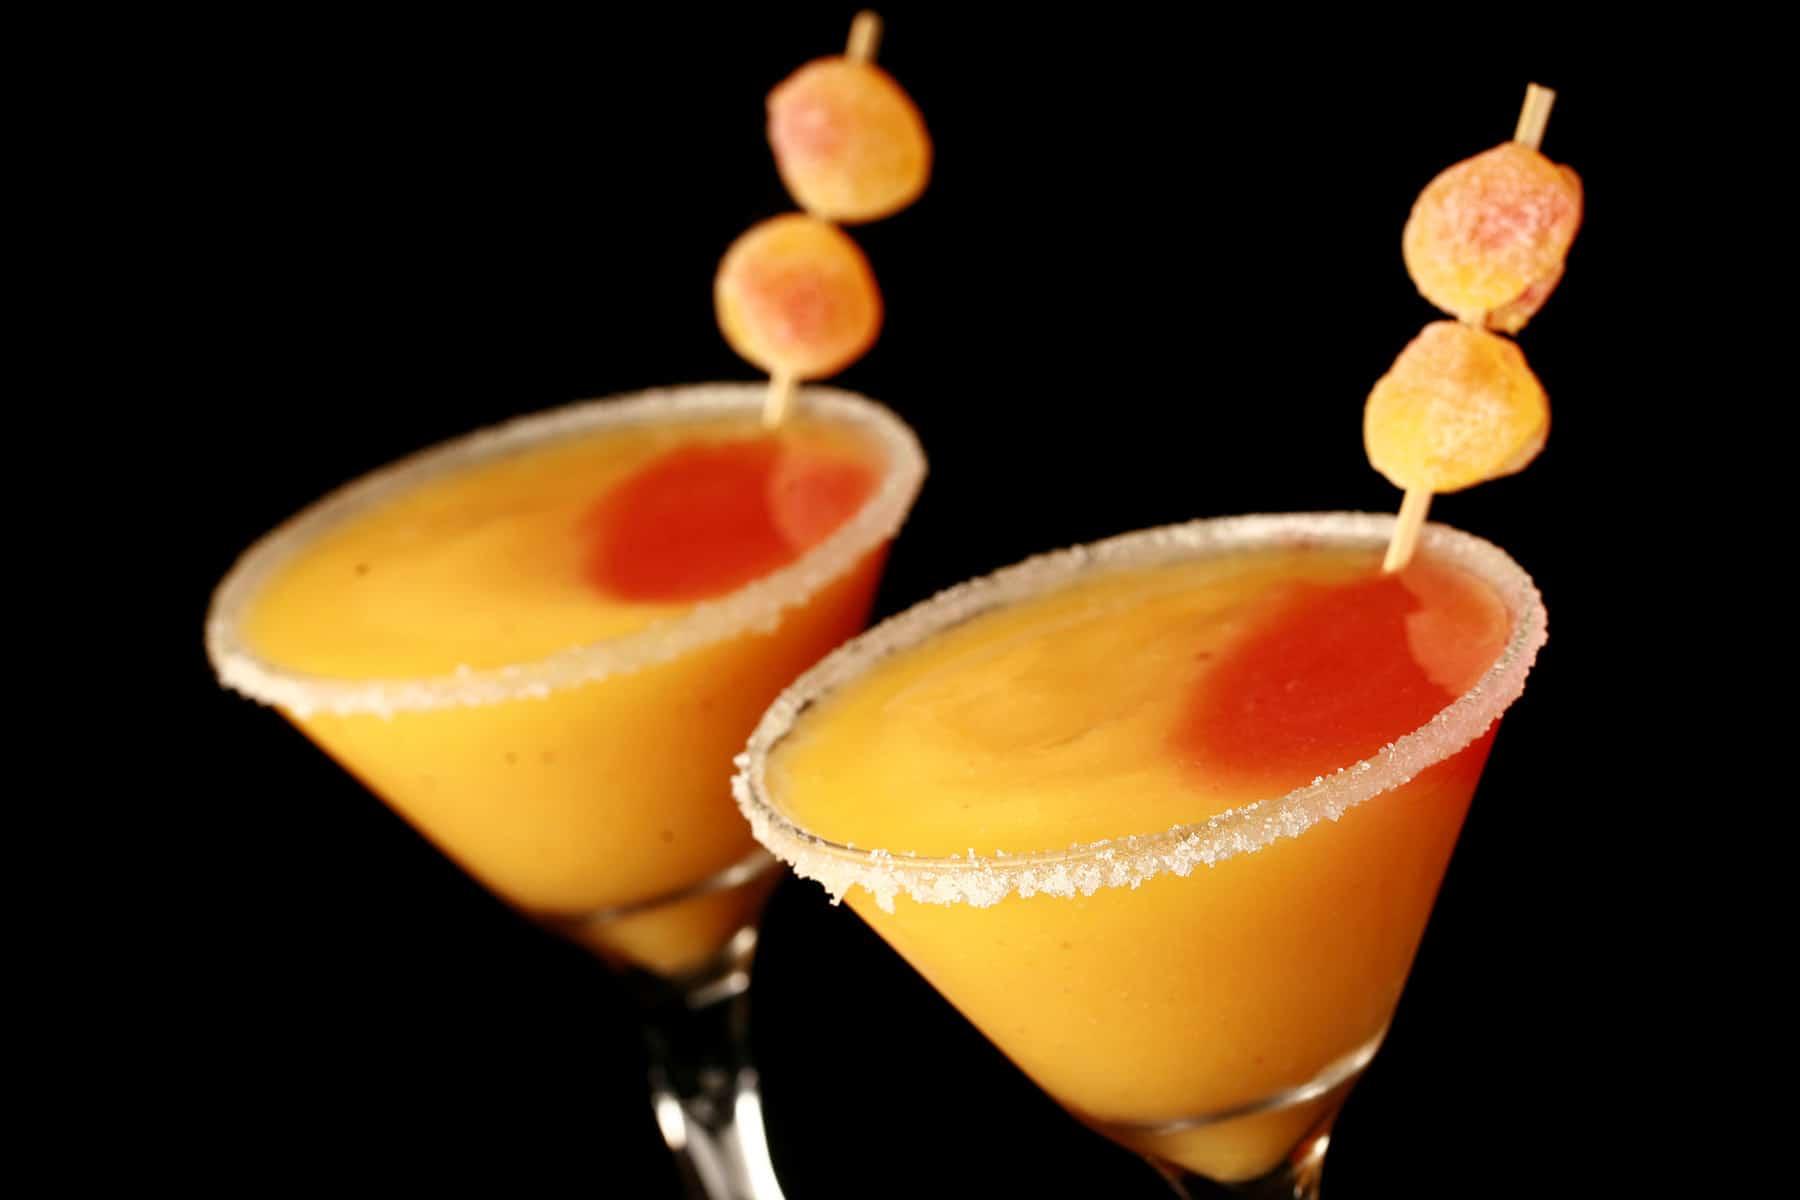 Two martini cocktail glasses with fuzzy peach candy cocktail - a peach coloured slush with a round section of red slush in it, garnished with gummy candies.